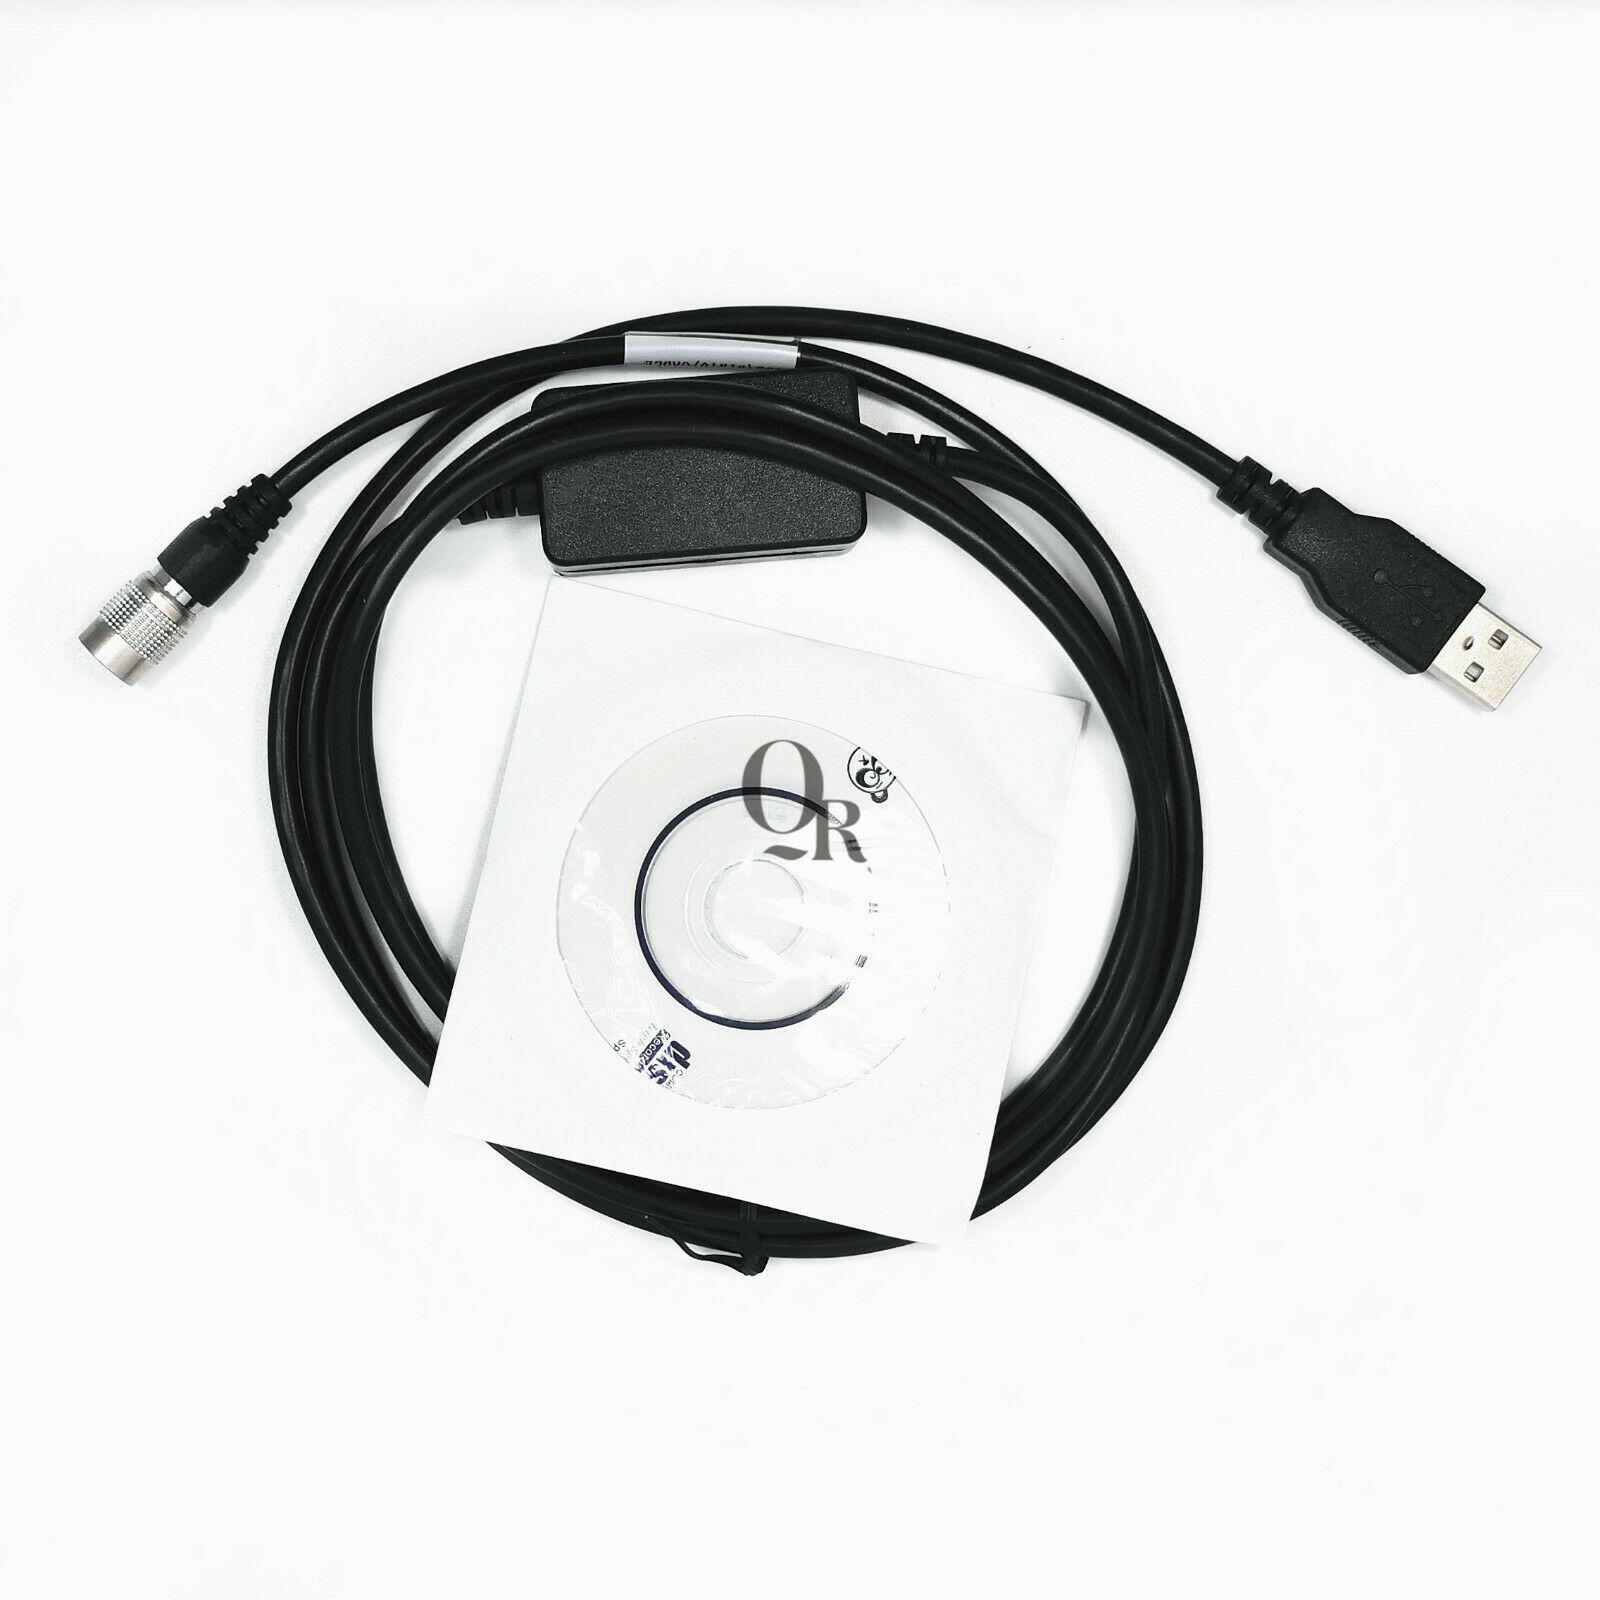 New Download Data USB Cable for Nikon Total Station WIN7/8/10 System